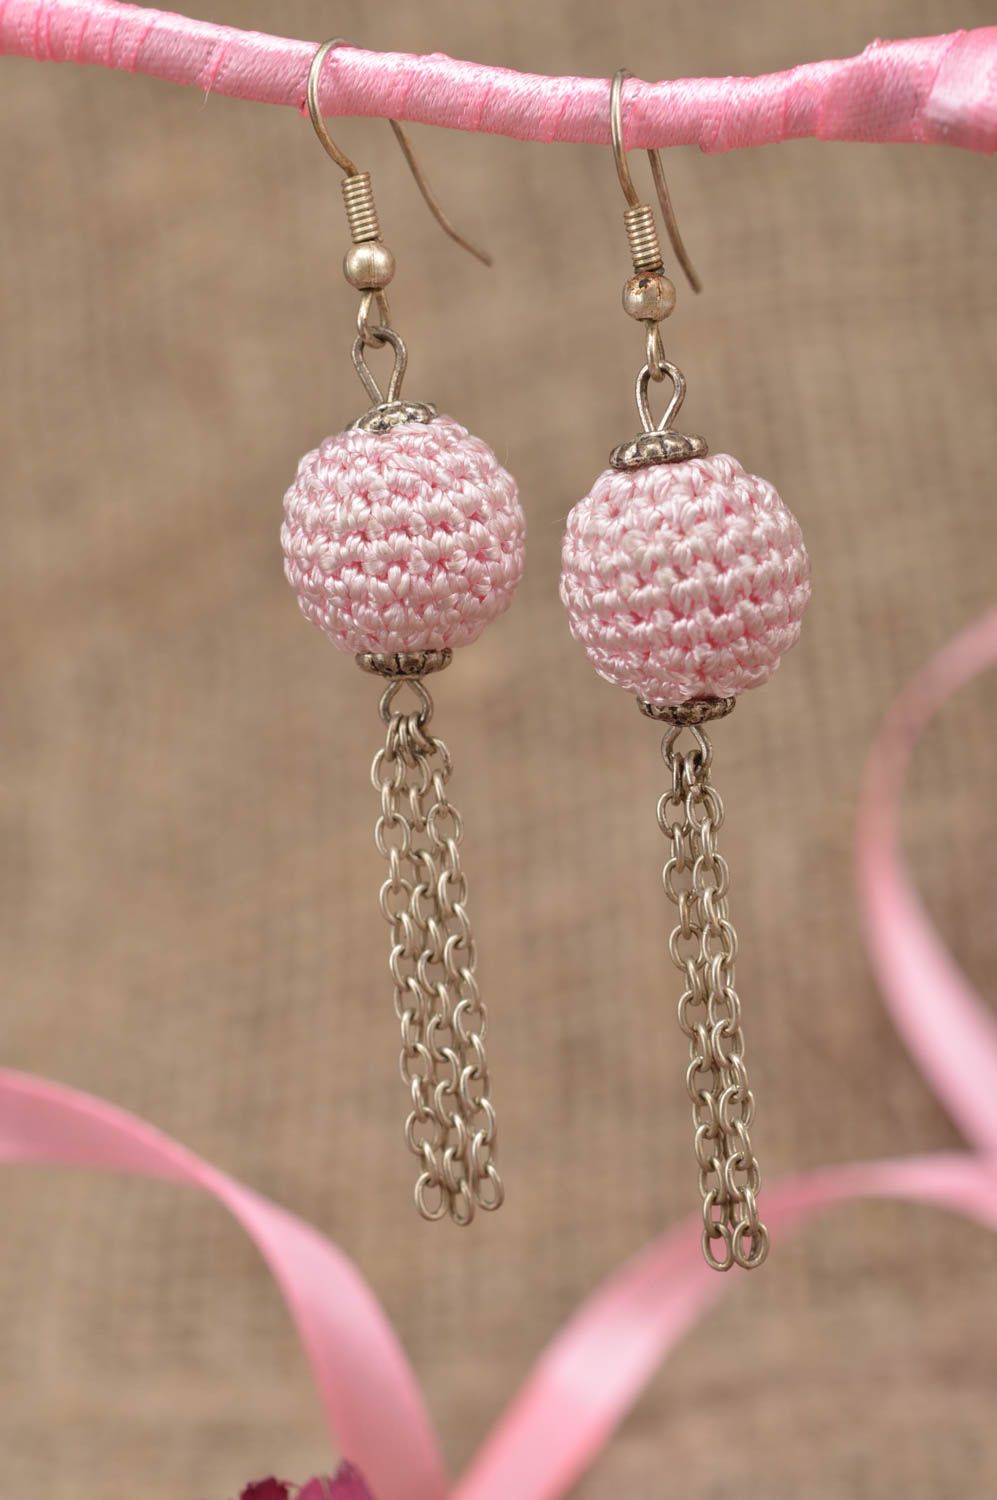 Handmade crocheted beaded earrings in pink color with charms and chains  photo 1